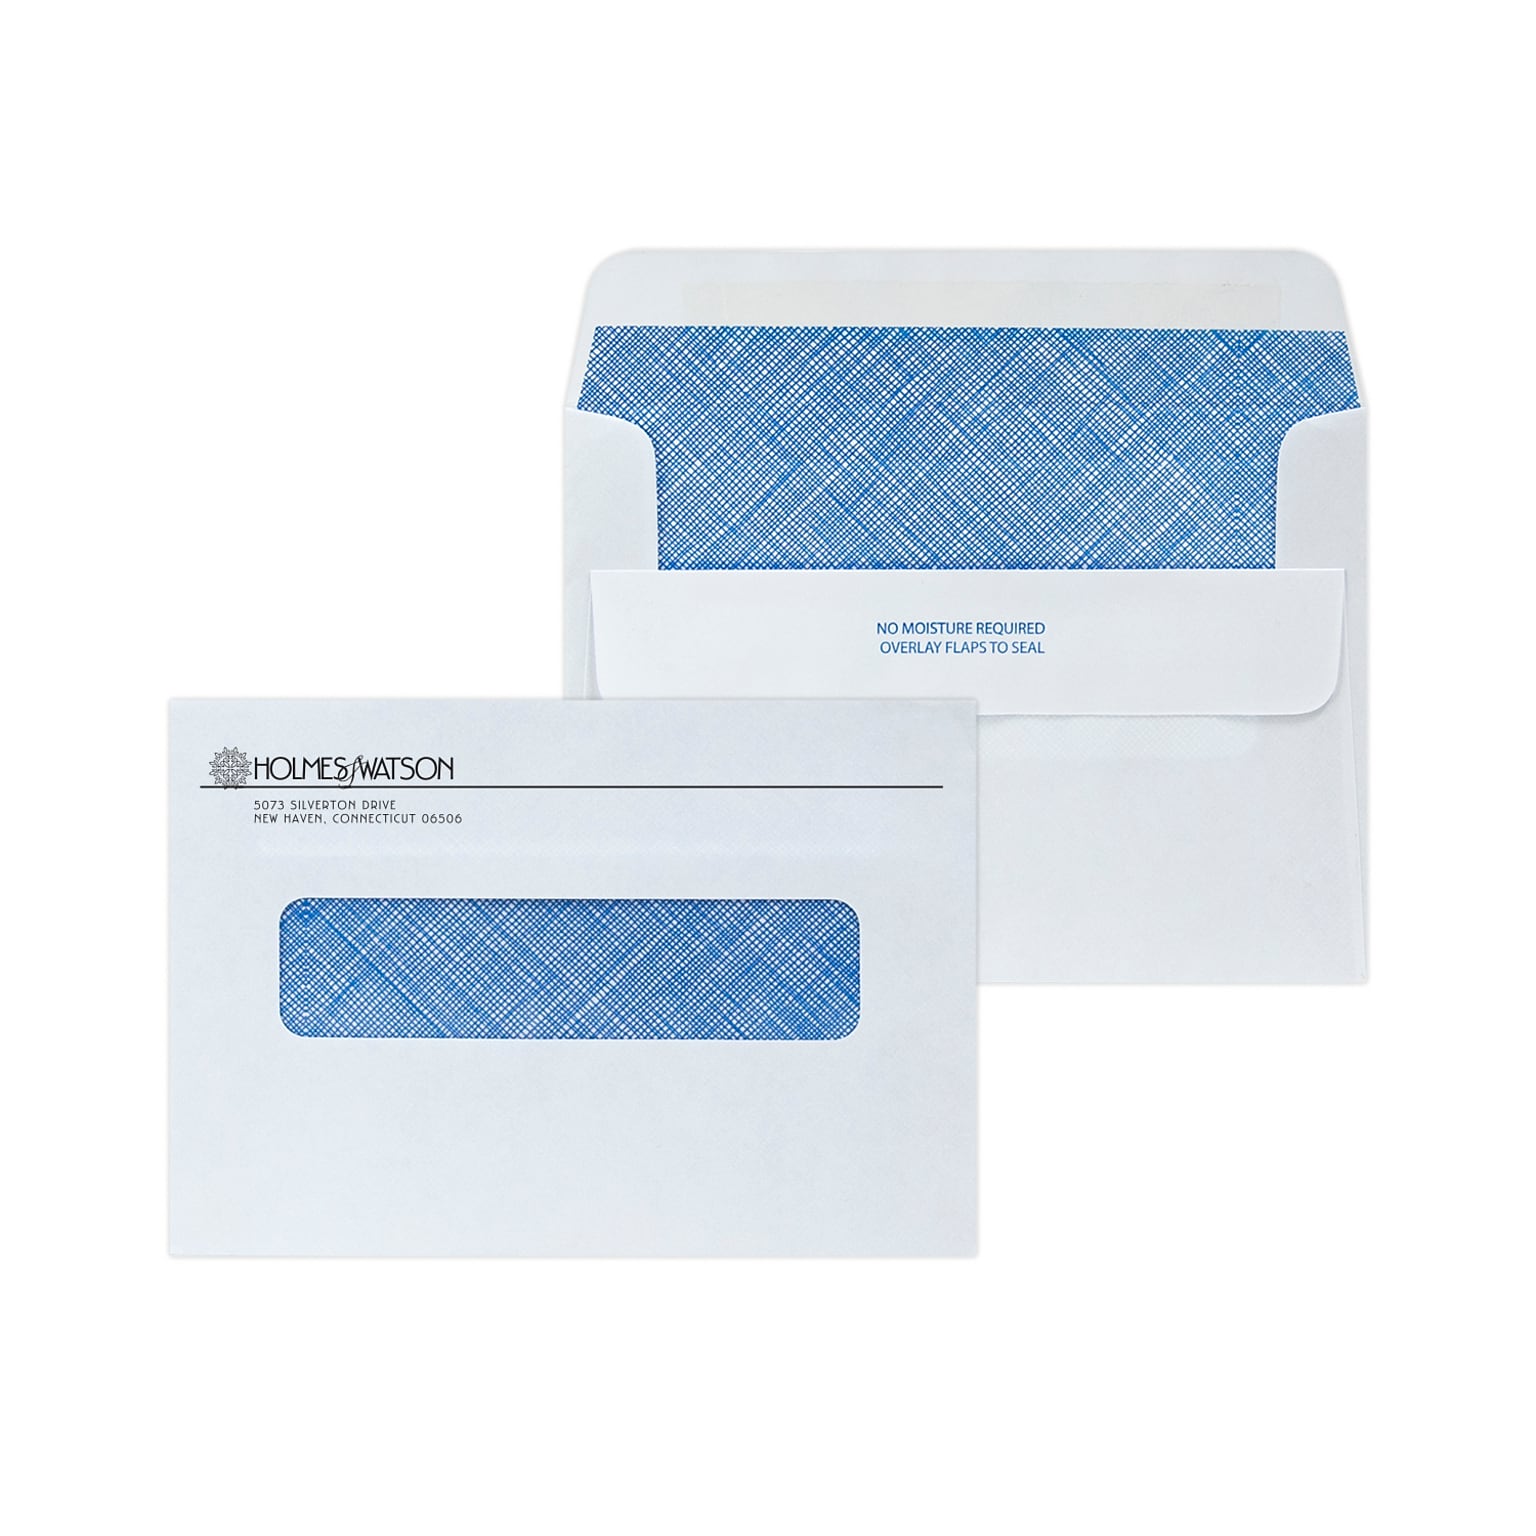 Custom 4-1/2 x 6-1/2 One Fold Self Seal Billing Window Envelopes with Security Tint, 24# White Wove, 1 Standard Ink, 250/Pack